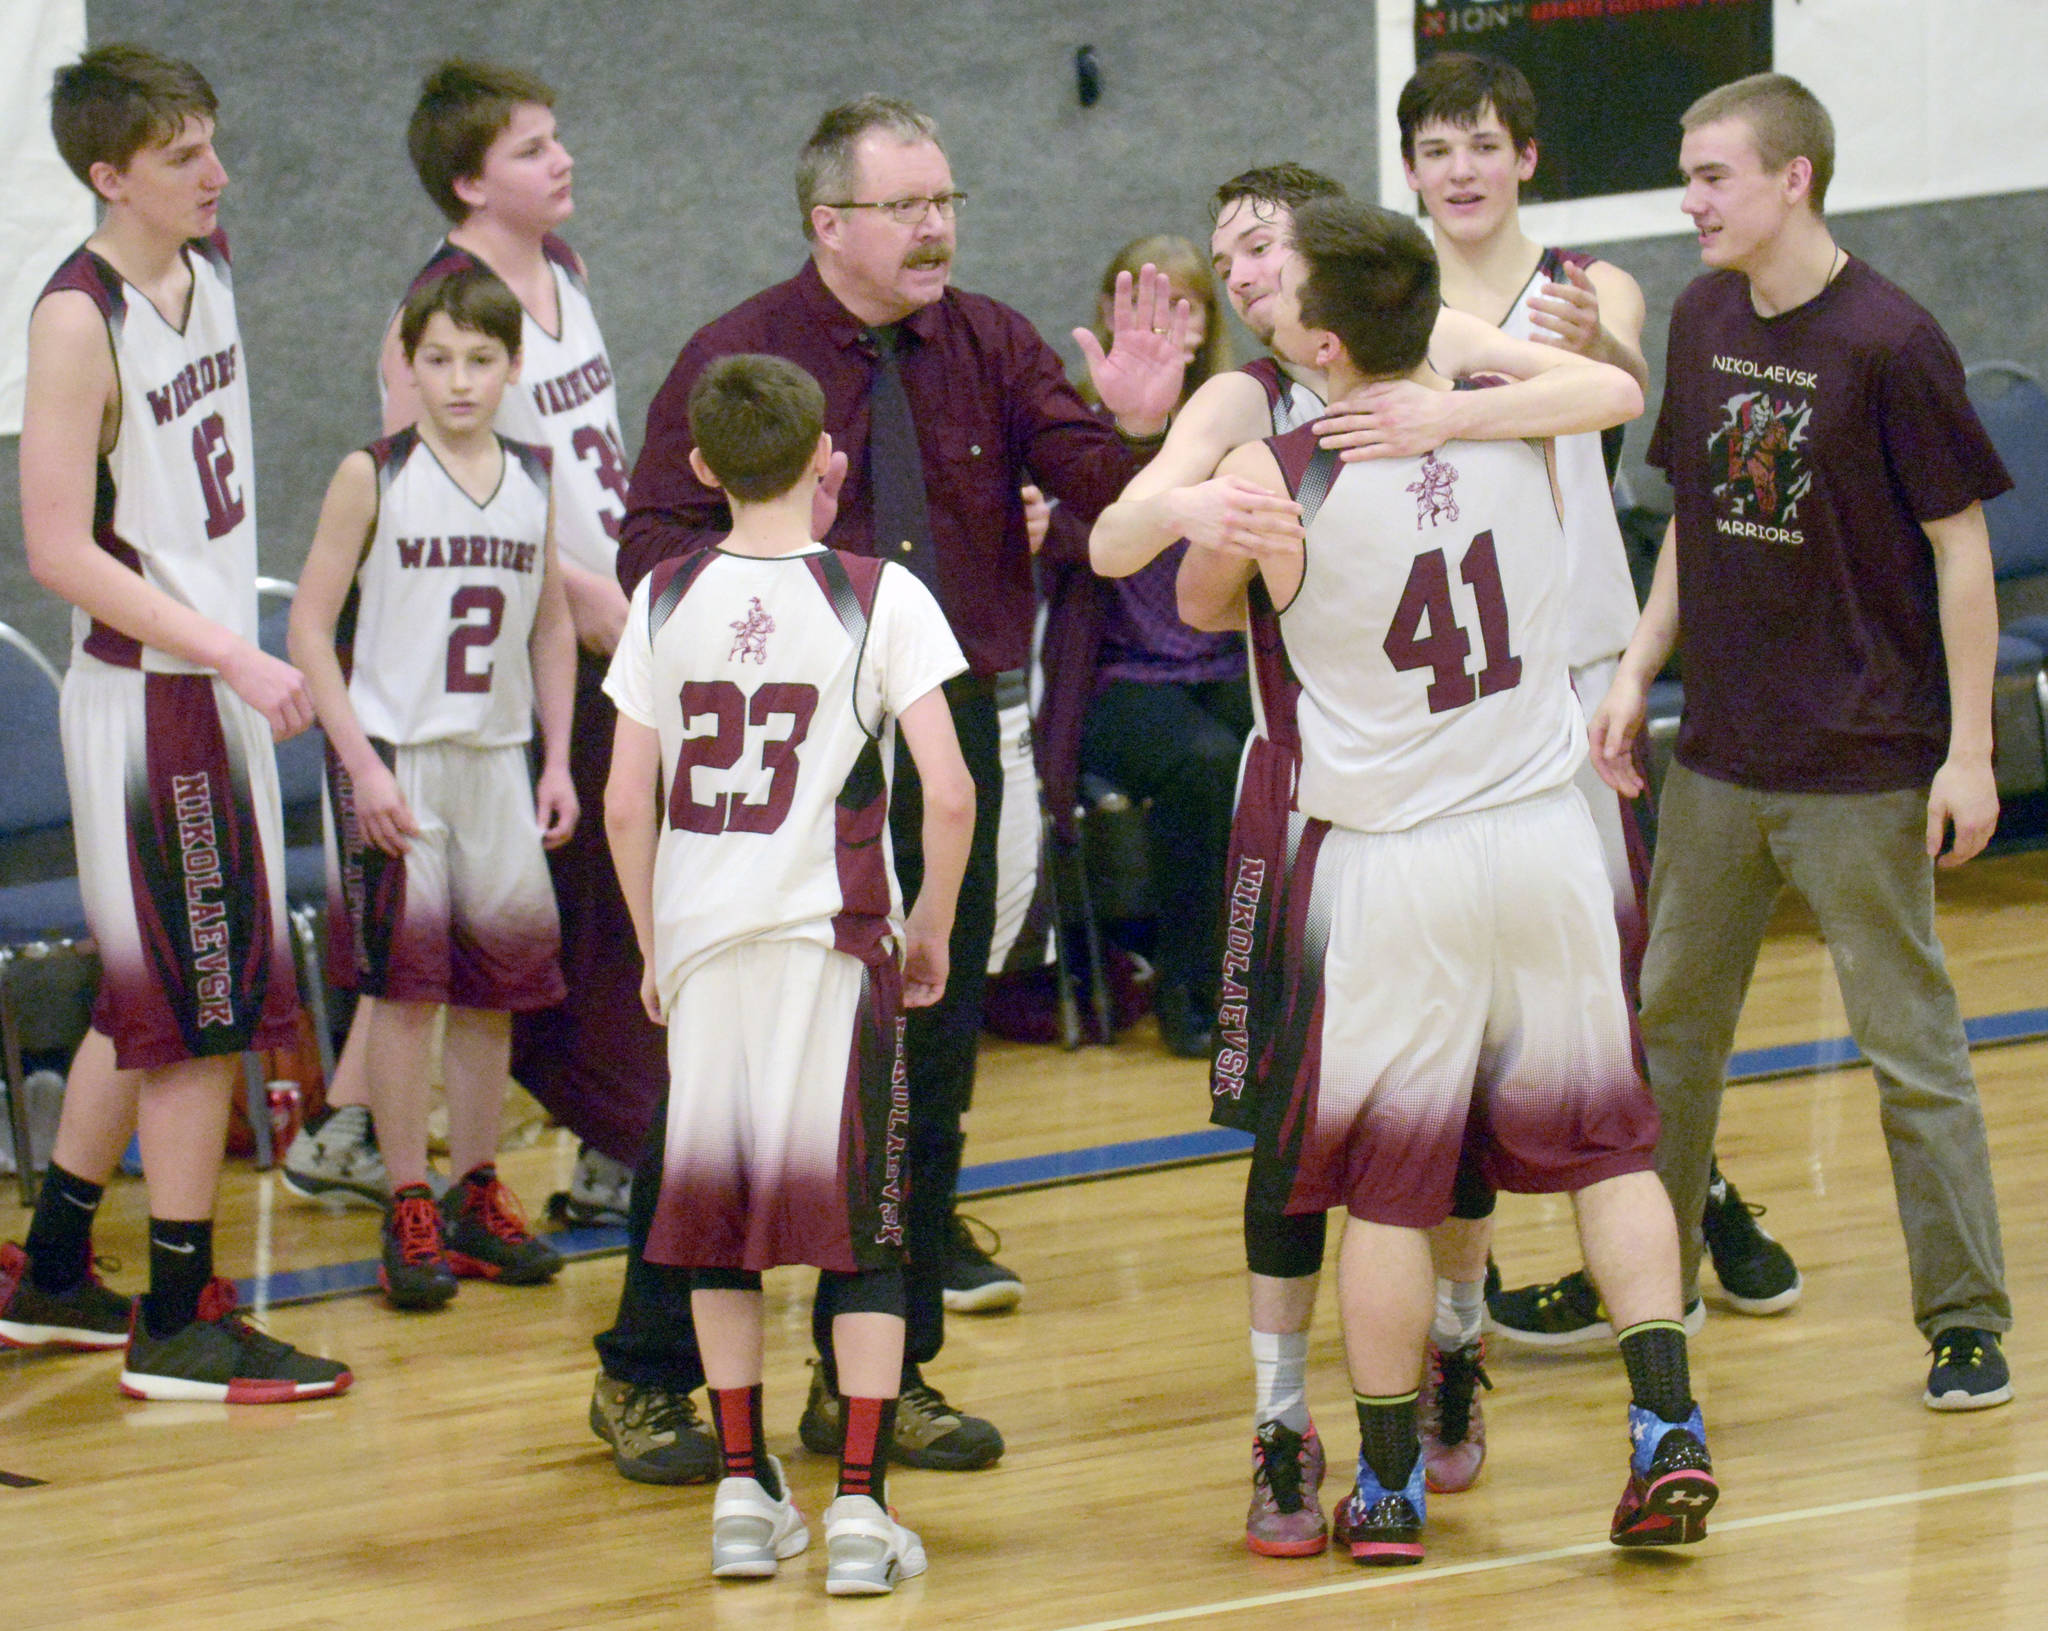 Nikolaevsk coach Steve Klaich celebrates with his team after winning his first Peninsula Conference title in his 30th season at the helm at Cook Inlet Academy in Soldotna. (Photo by Jeff Helminiak/Peninsula Clarion)